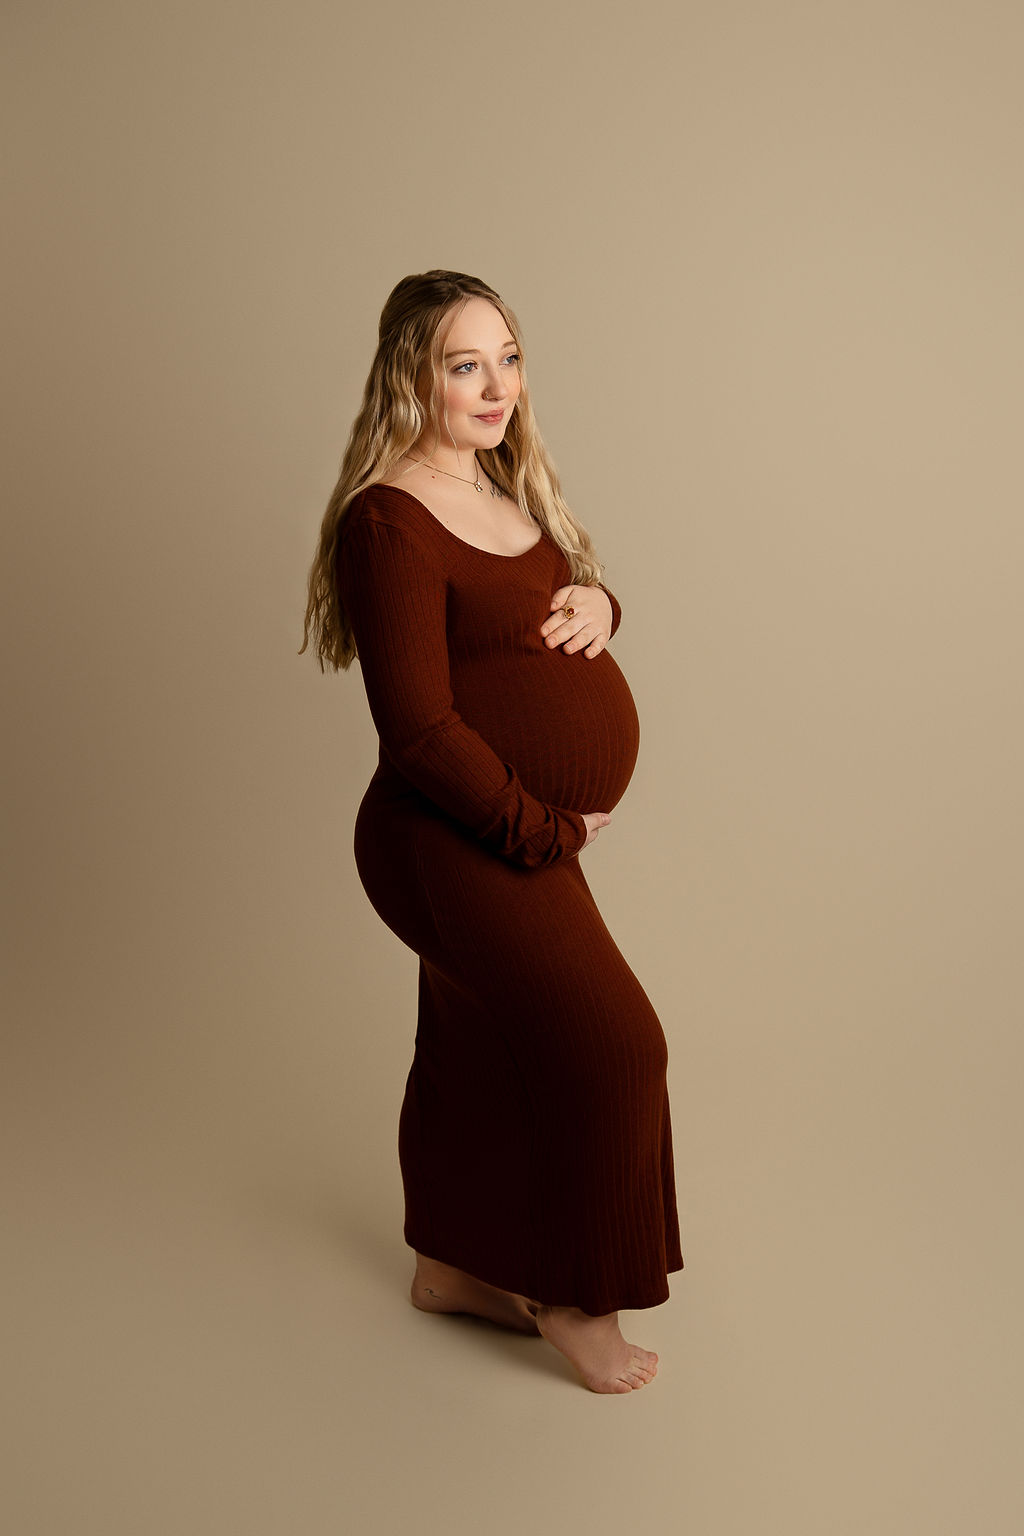 A mom to be holds her bump while standing in a studio in a red maternity gown